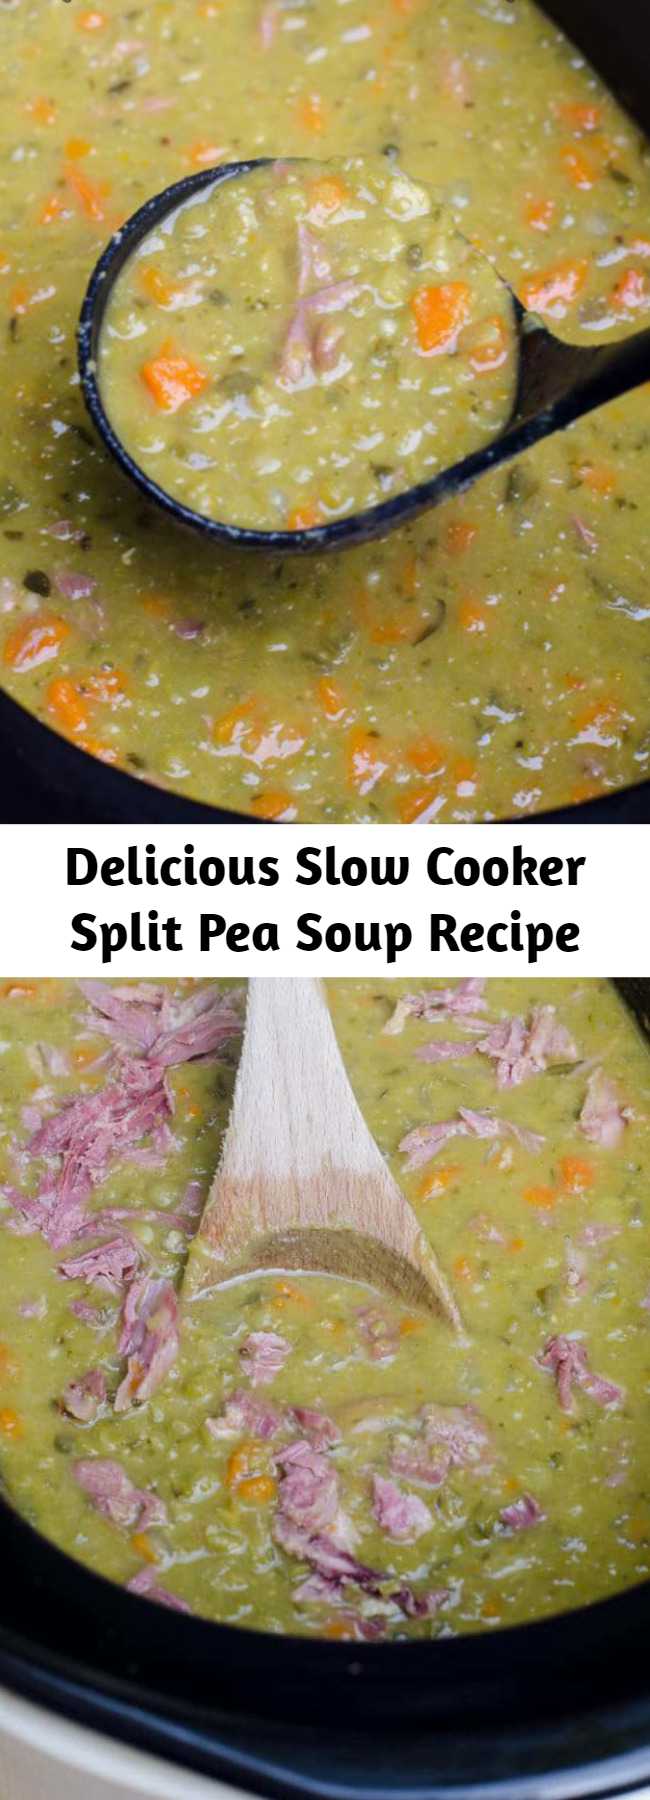 Delicious Slow Cooker Split Pea Soup Recipe - Slow Cooker Split Pea Soup is a great way to make use of that leftover bone from your holiday ham. Cooking it low and slow is the best method for creating creamy, delicious split pea soup.